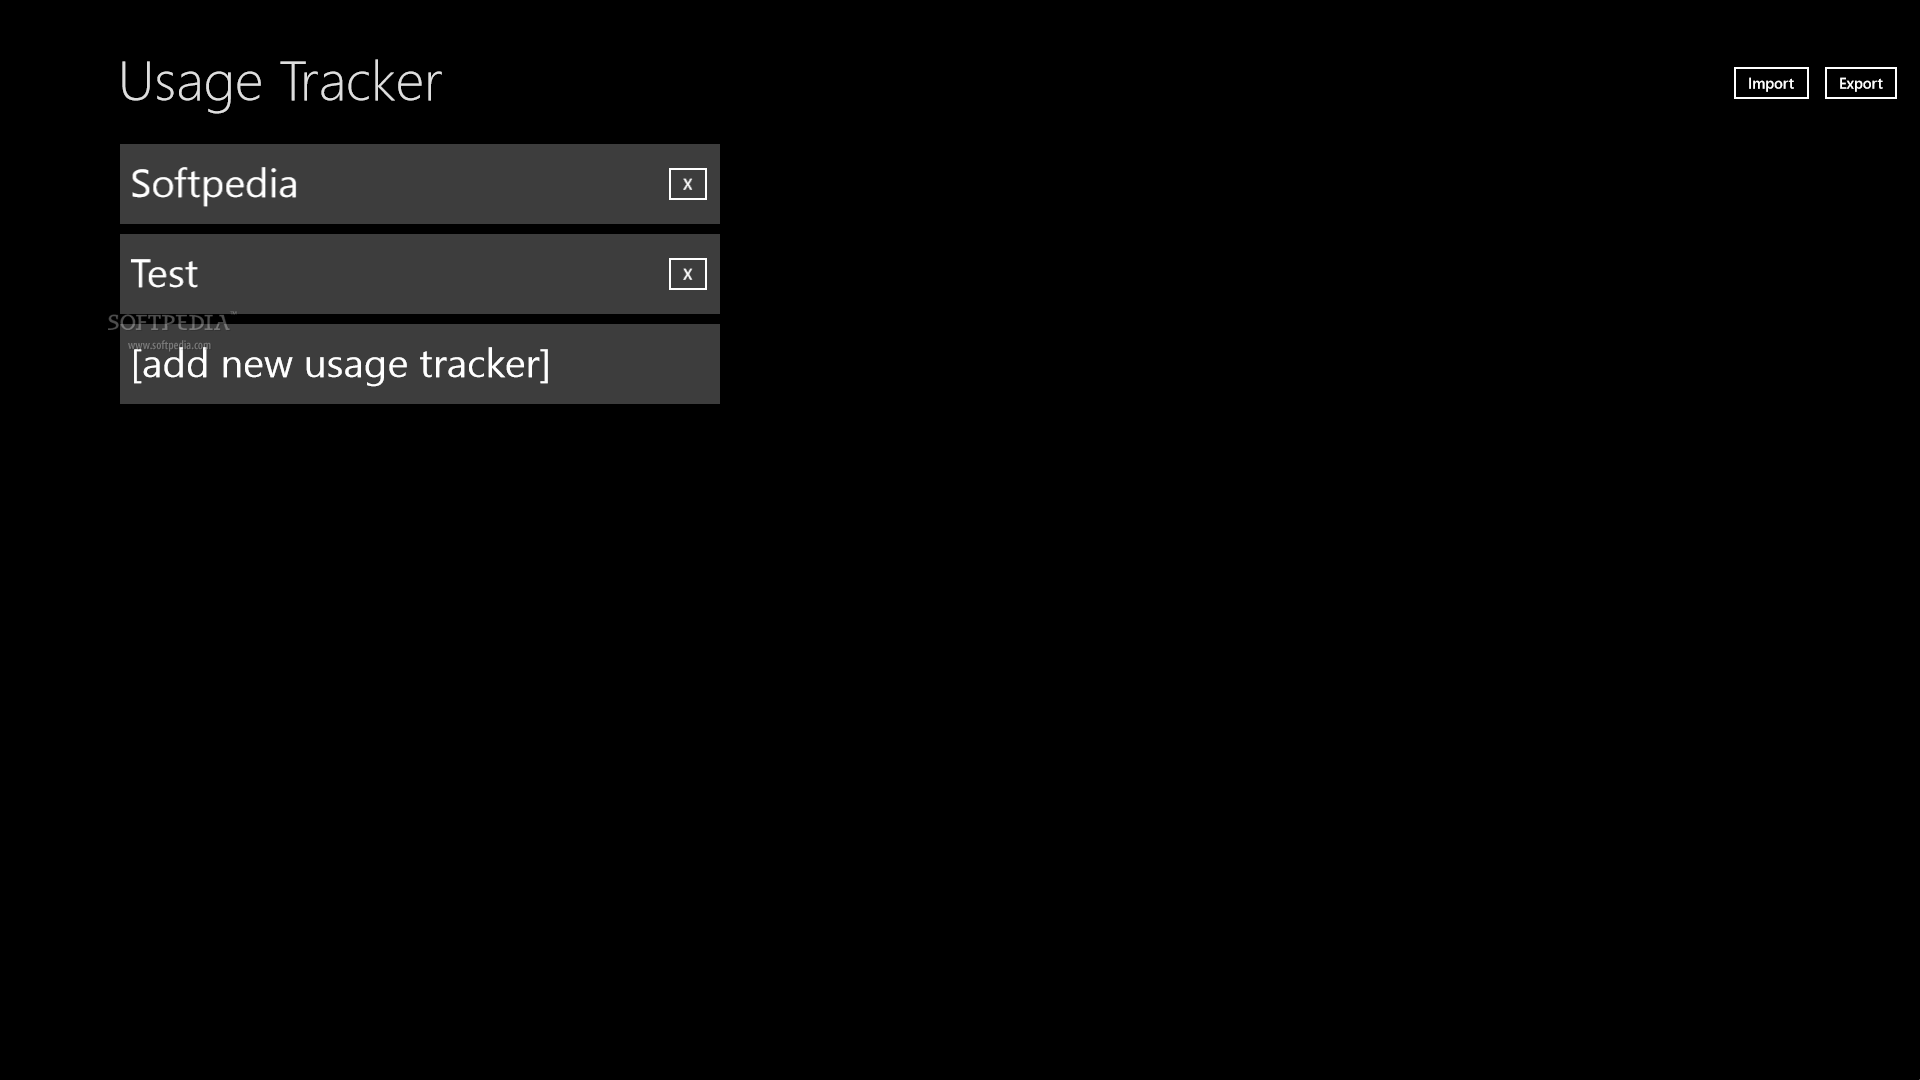 Download Usage Tracker for Windows 8 1.0.0.1